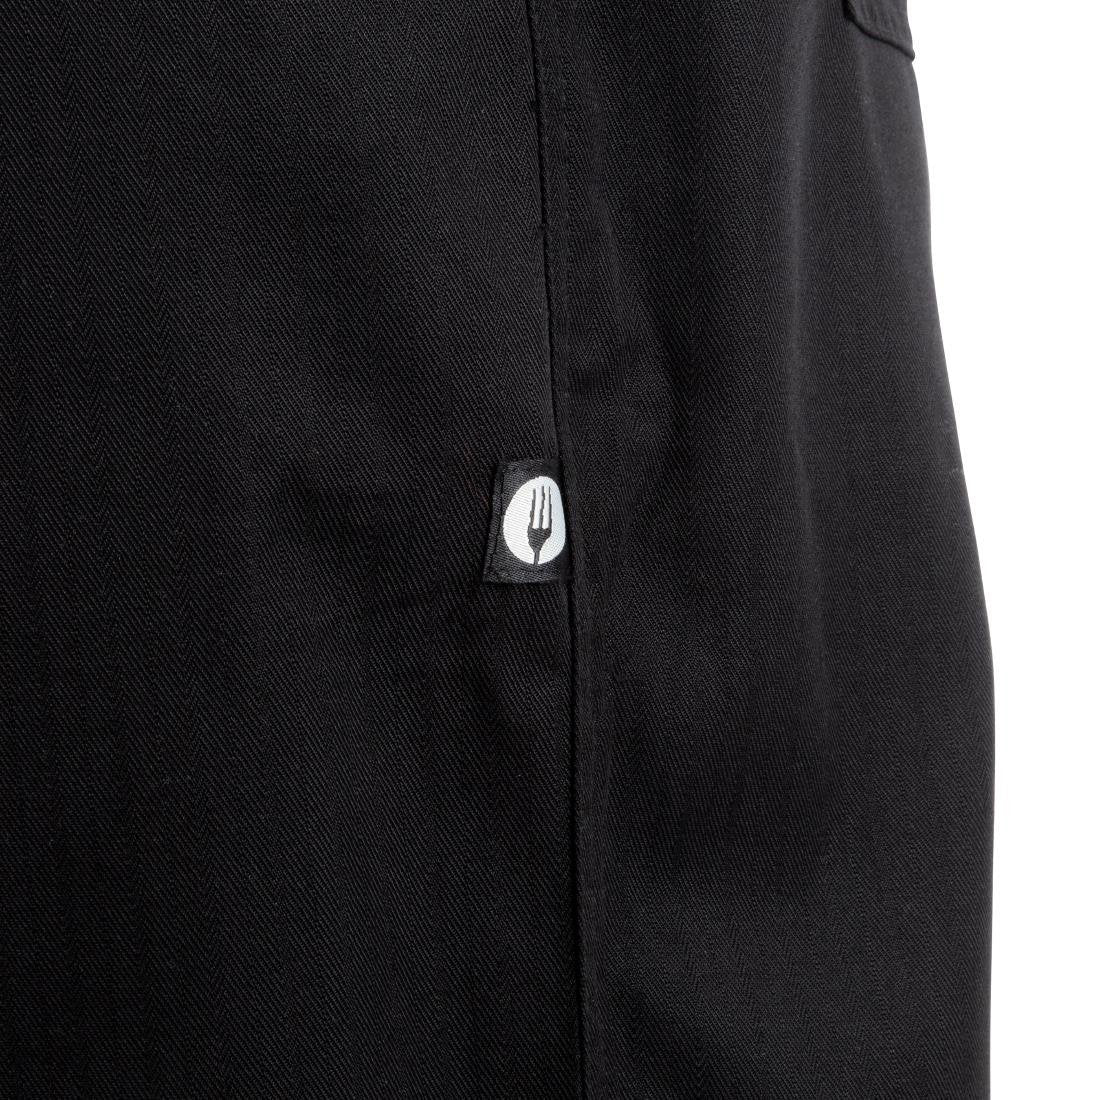 A695-XS Chef Works Unisex Better Built Baggy Chefs Trousers Black XS